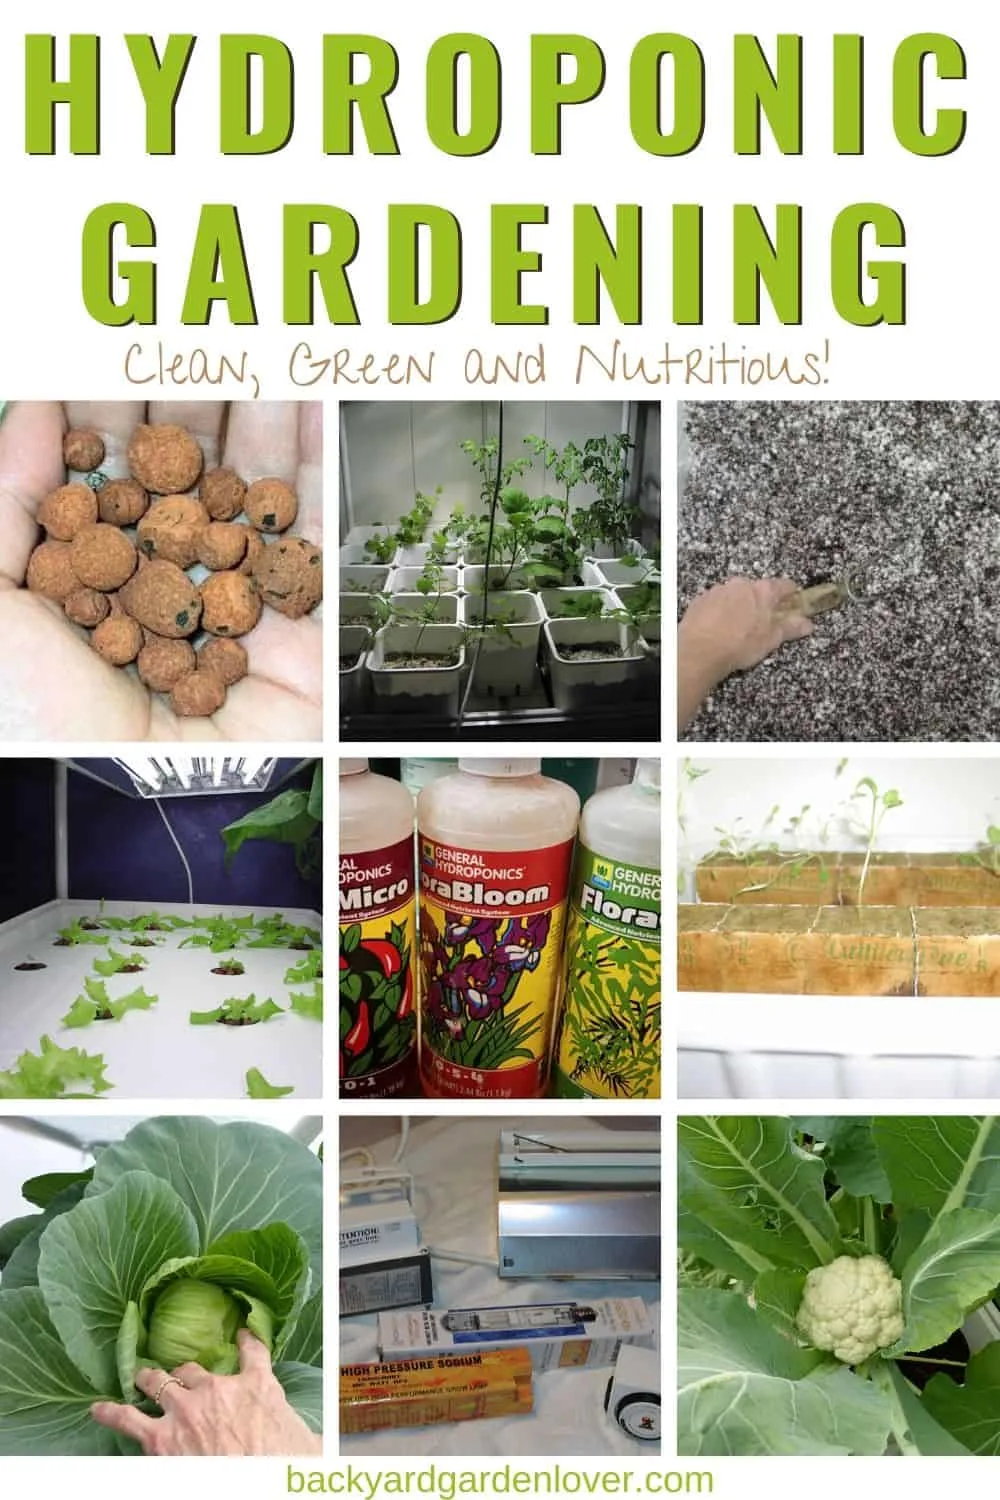 Hydroponic gardening in pictures - Pinterest image